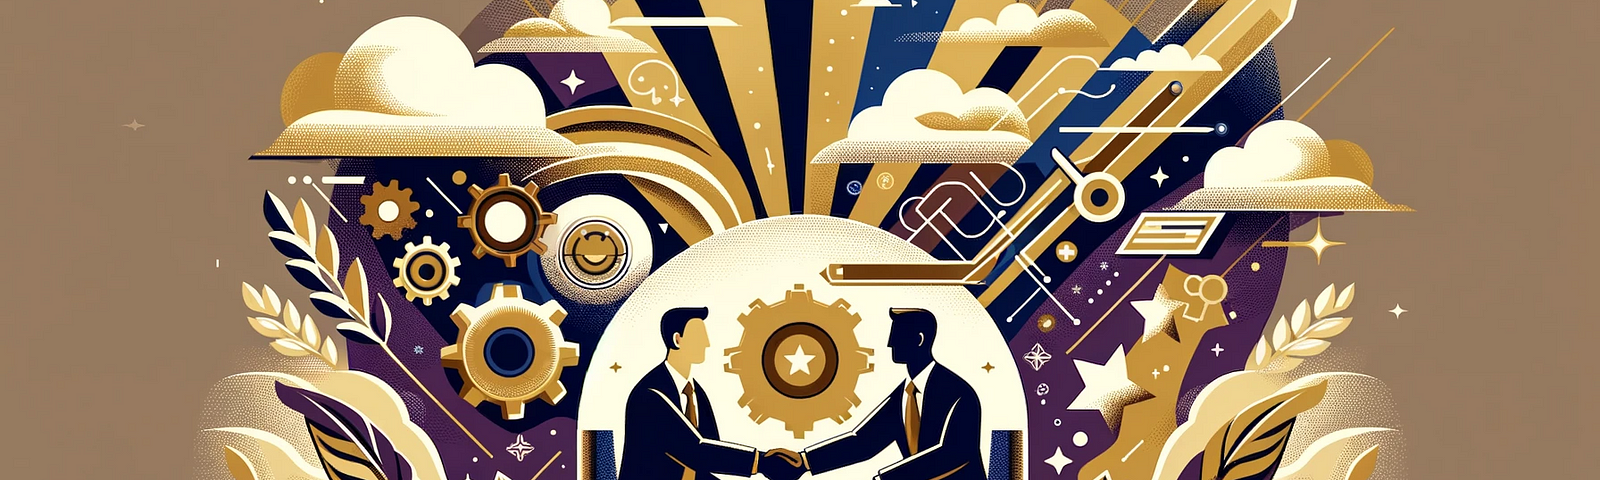 Illustration of a consultant and customer shaking hands, symbolizing a successful ICT sales consultation. The background blends beige, gold, and dark violet colors, representing themes of trust, value, and professional expertise